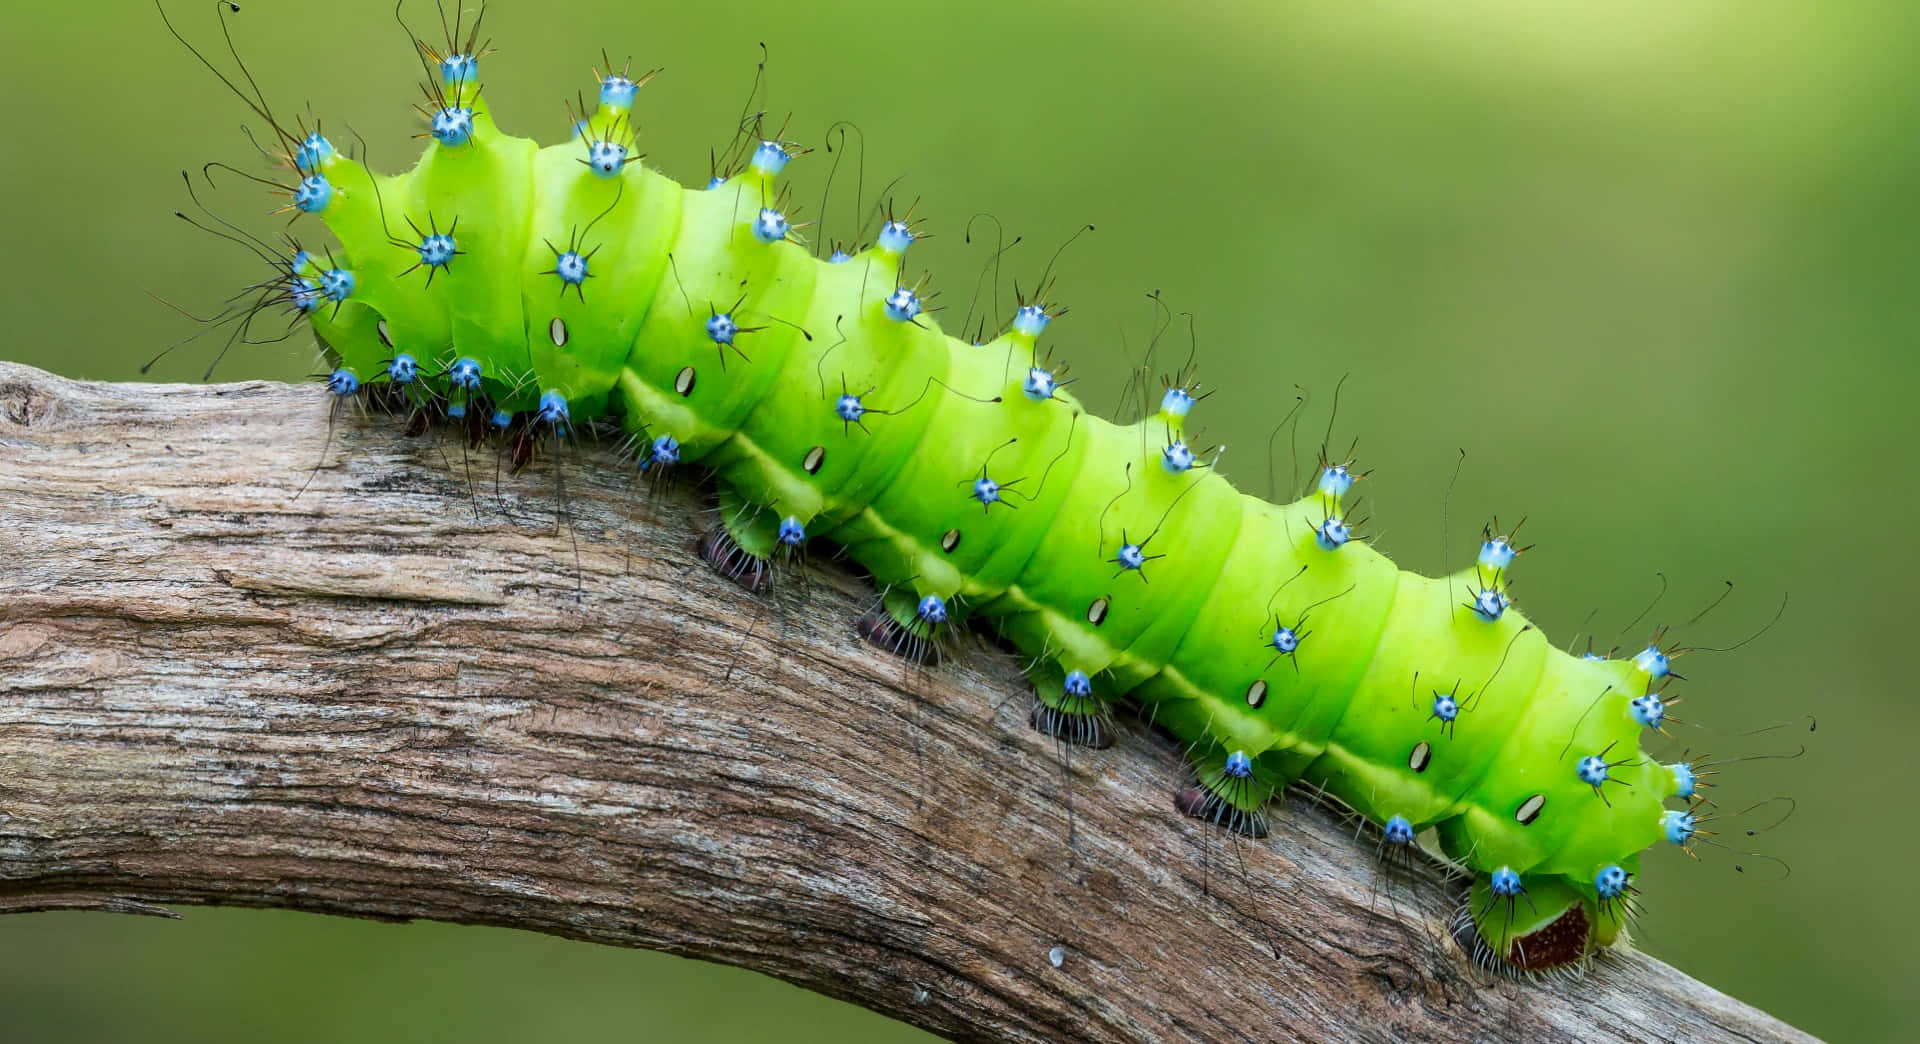 A close up of a Caterpillar Insect